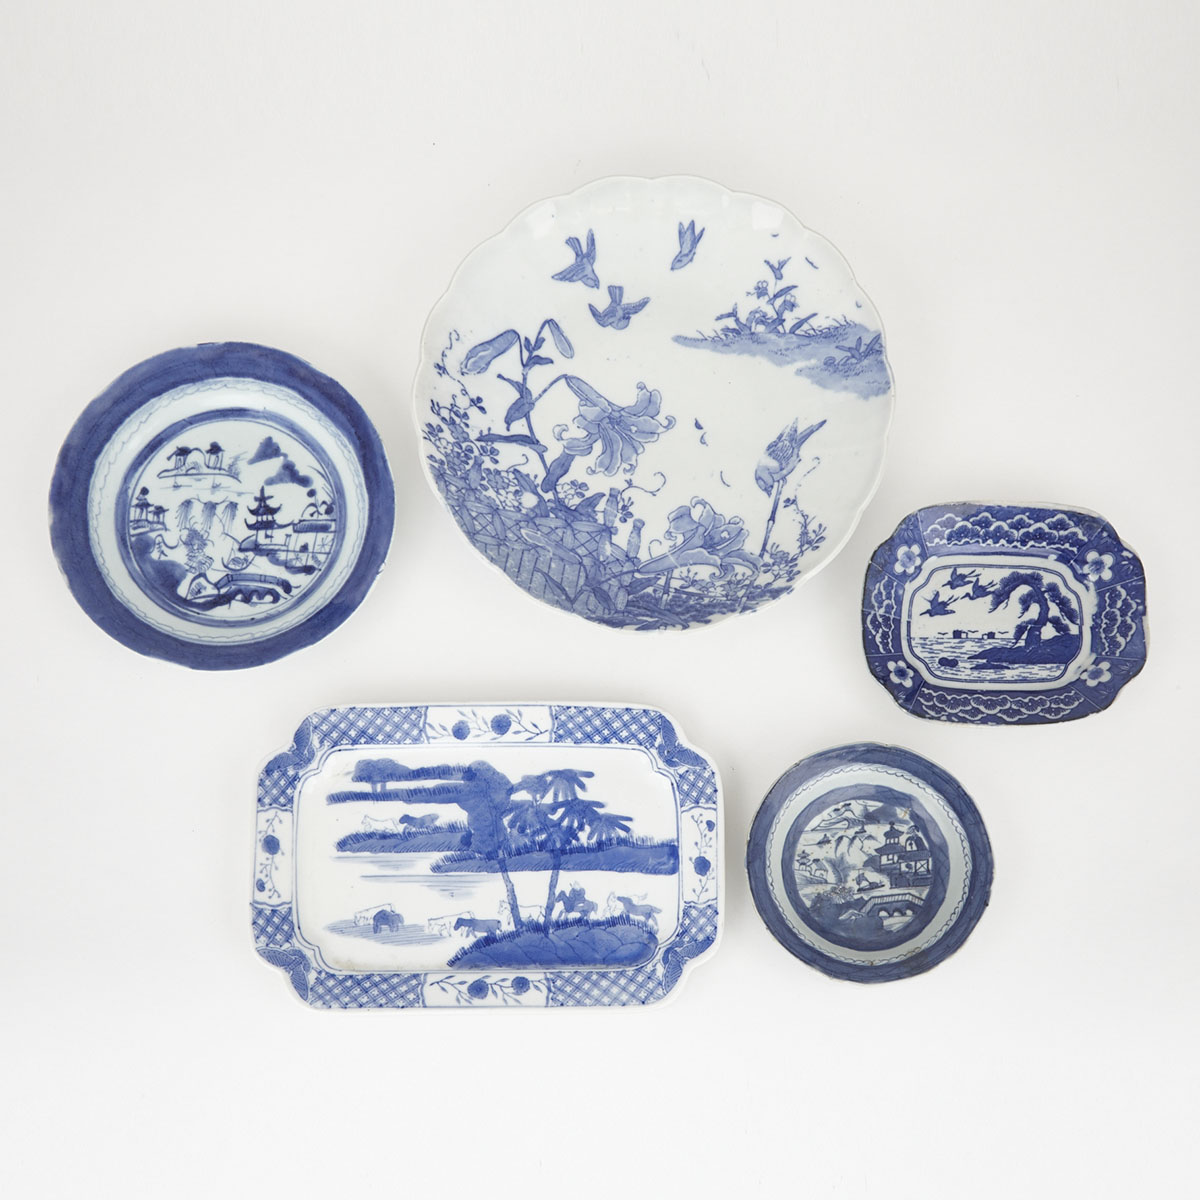 Group of Five Blue and White Dishes